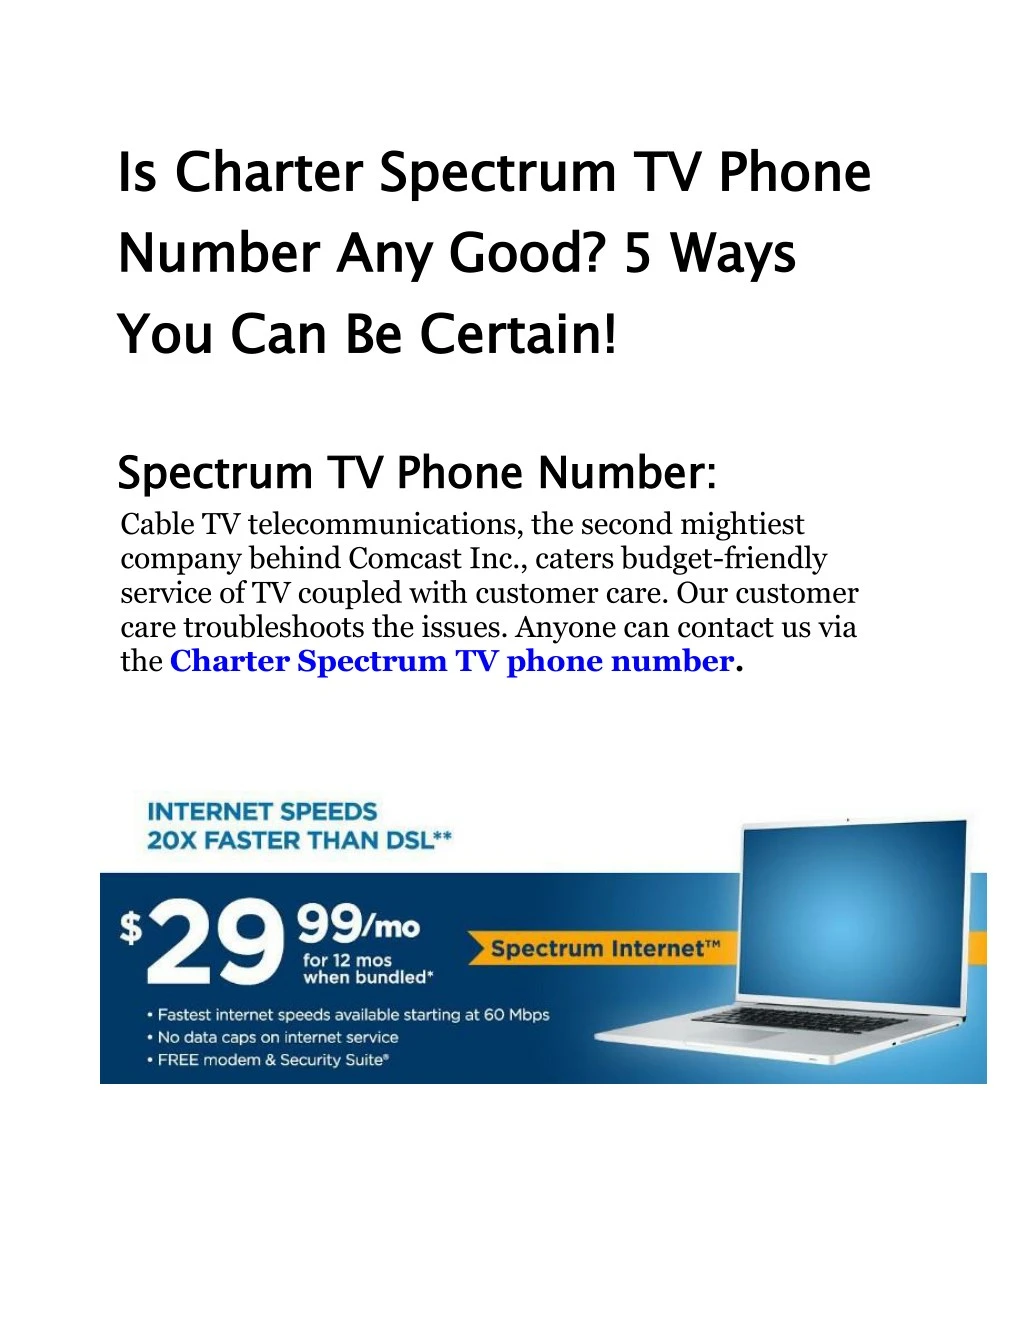 is charter spectrum tv phone number any good